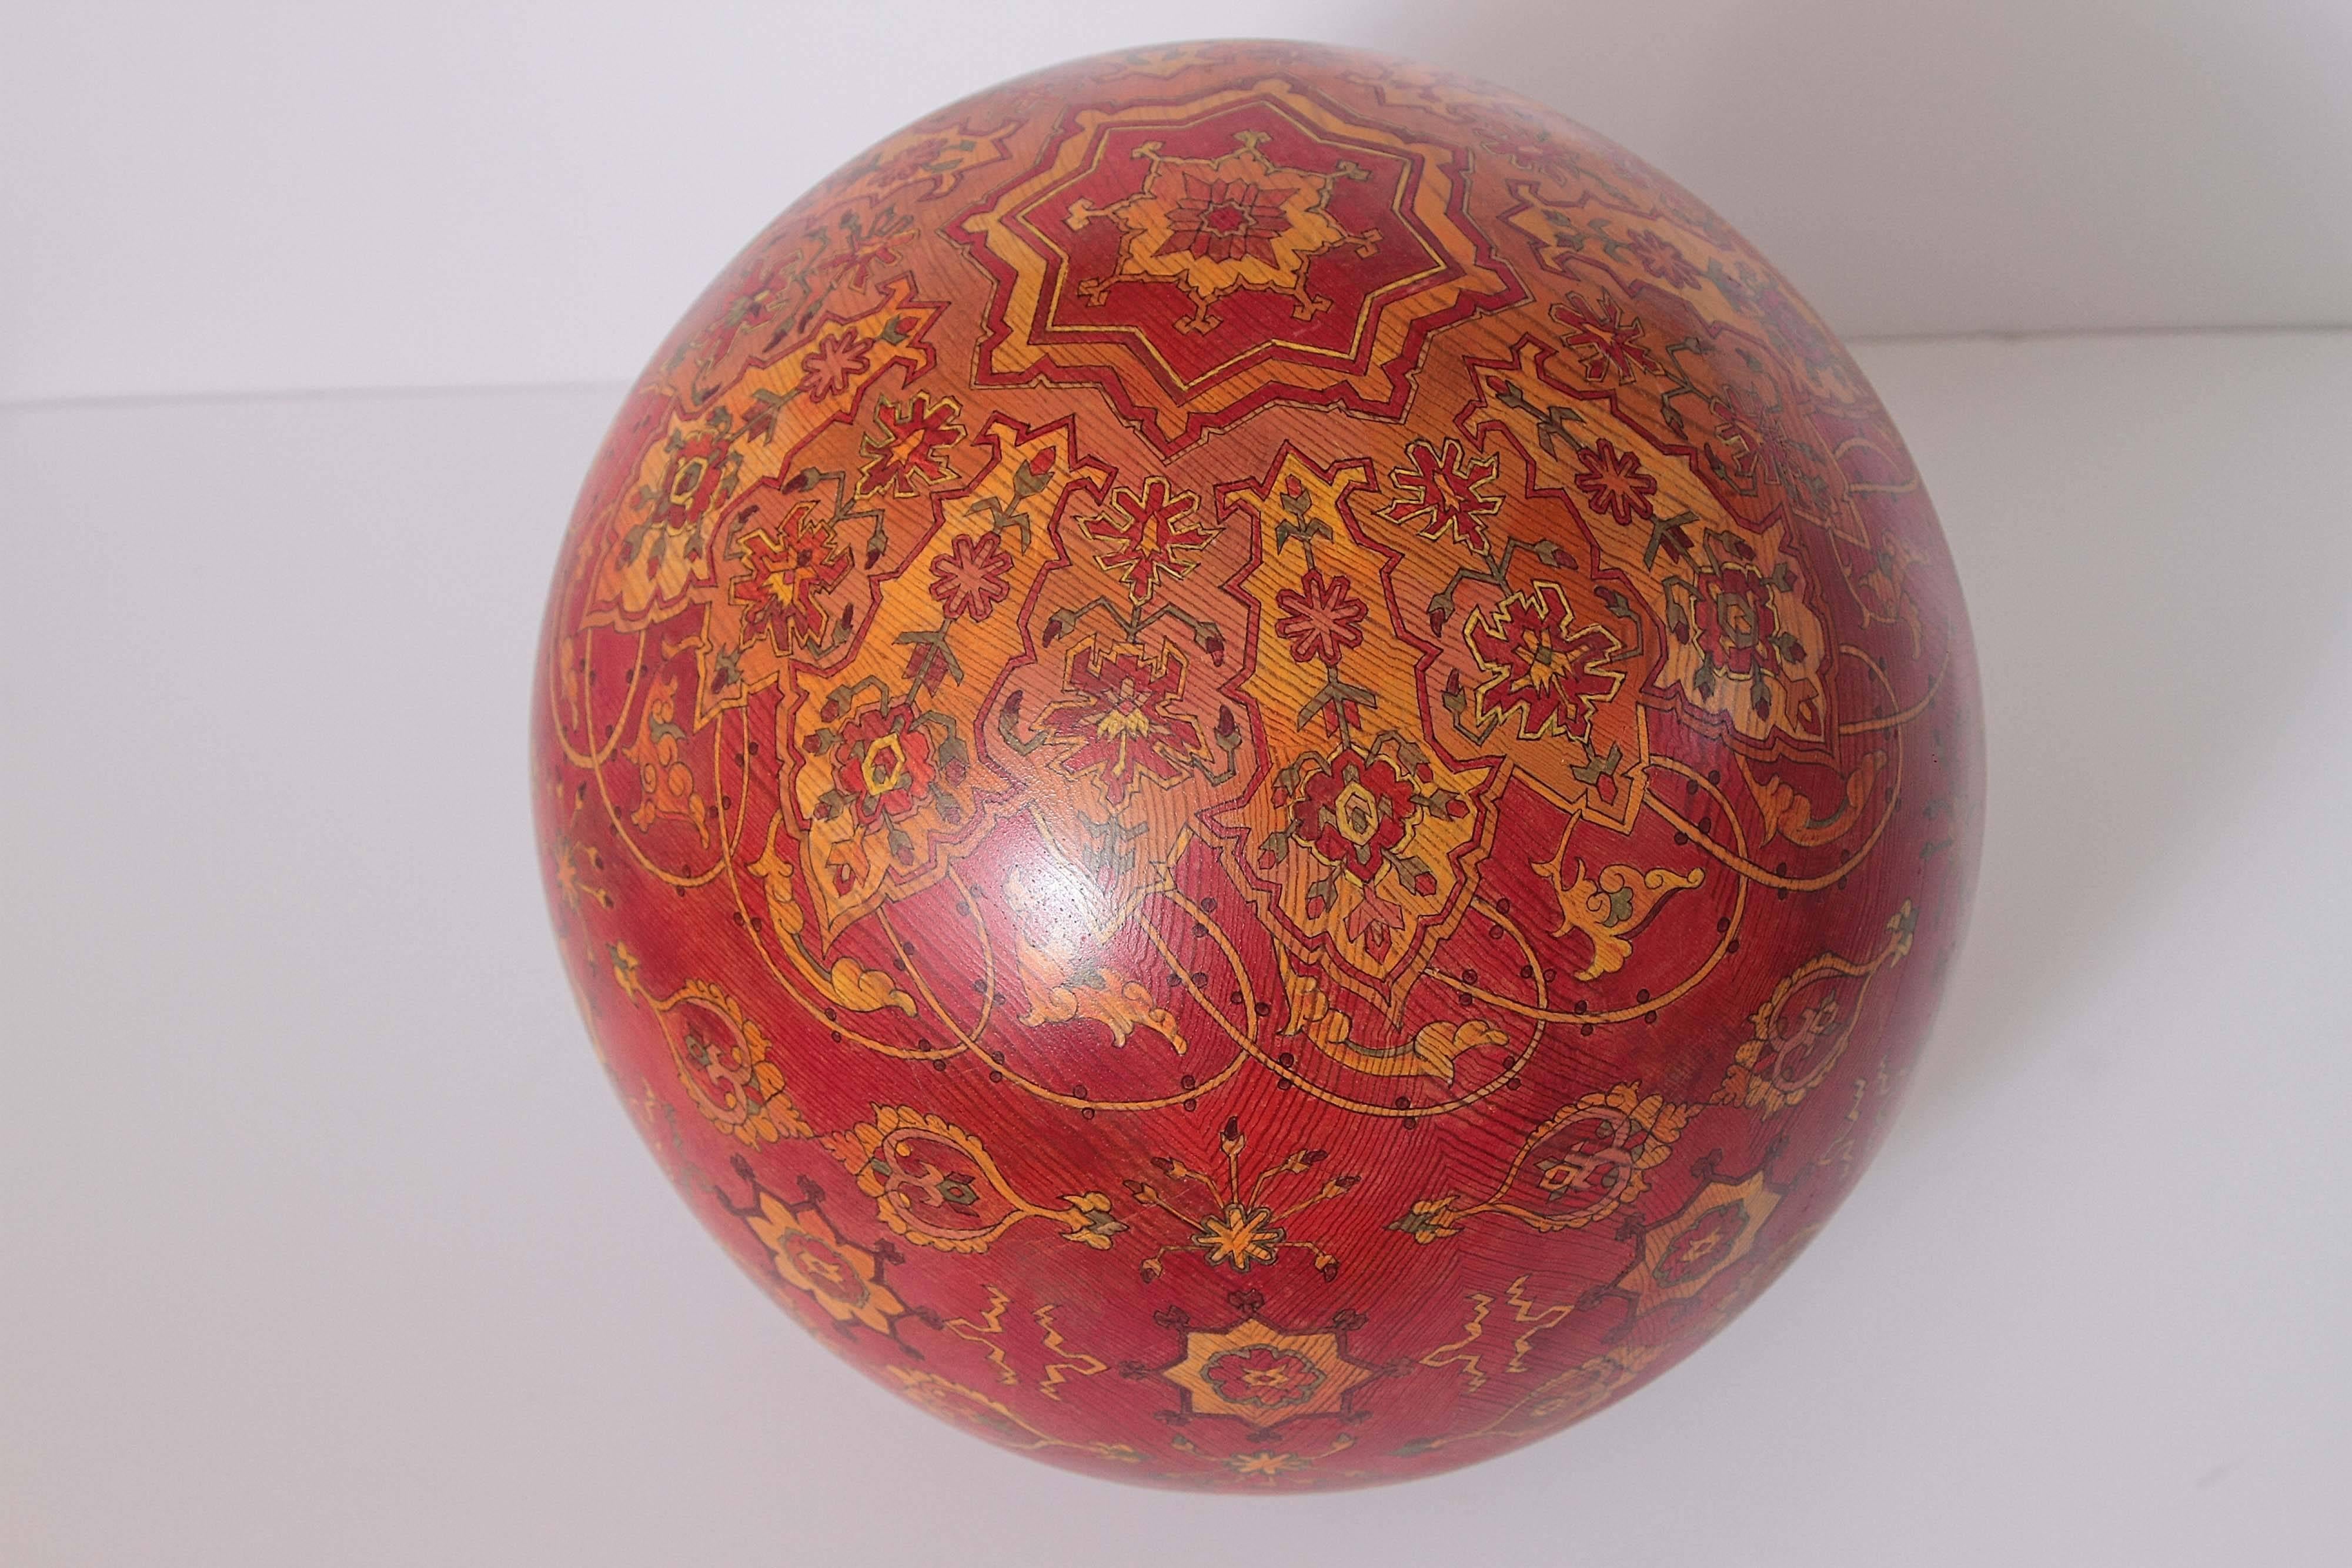 A stunning and-sculpted solid sugar pine sphere sculpture with archival ink drawn designs and hand-painted with watercolor. This piece has been hand-sealed and museum waxed by artist Michael Stallings. This was painted in the early 2000’s. Inspired